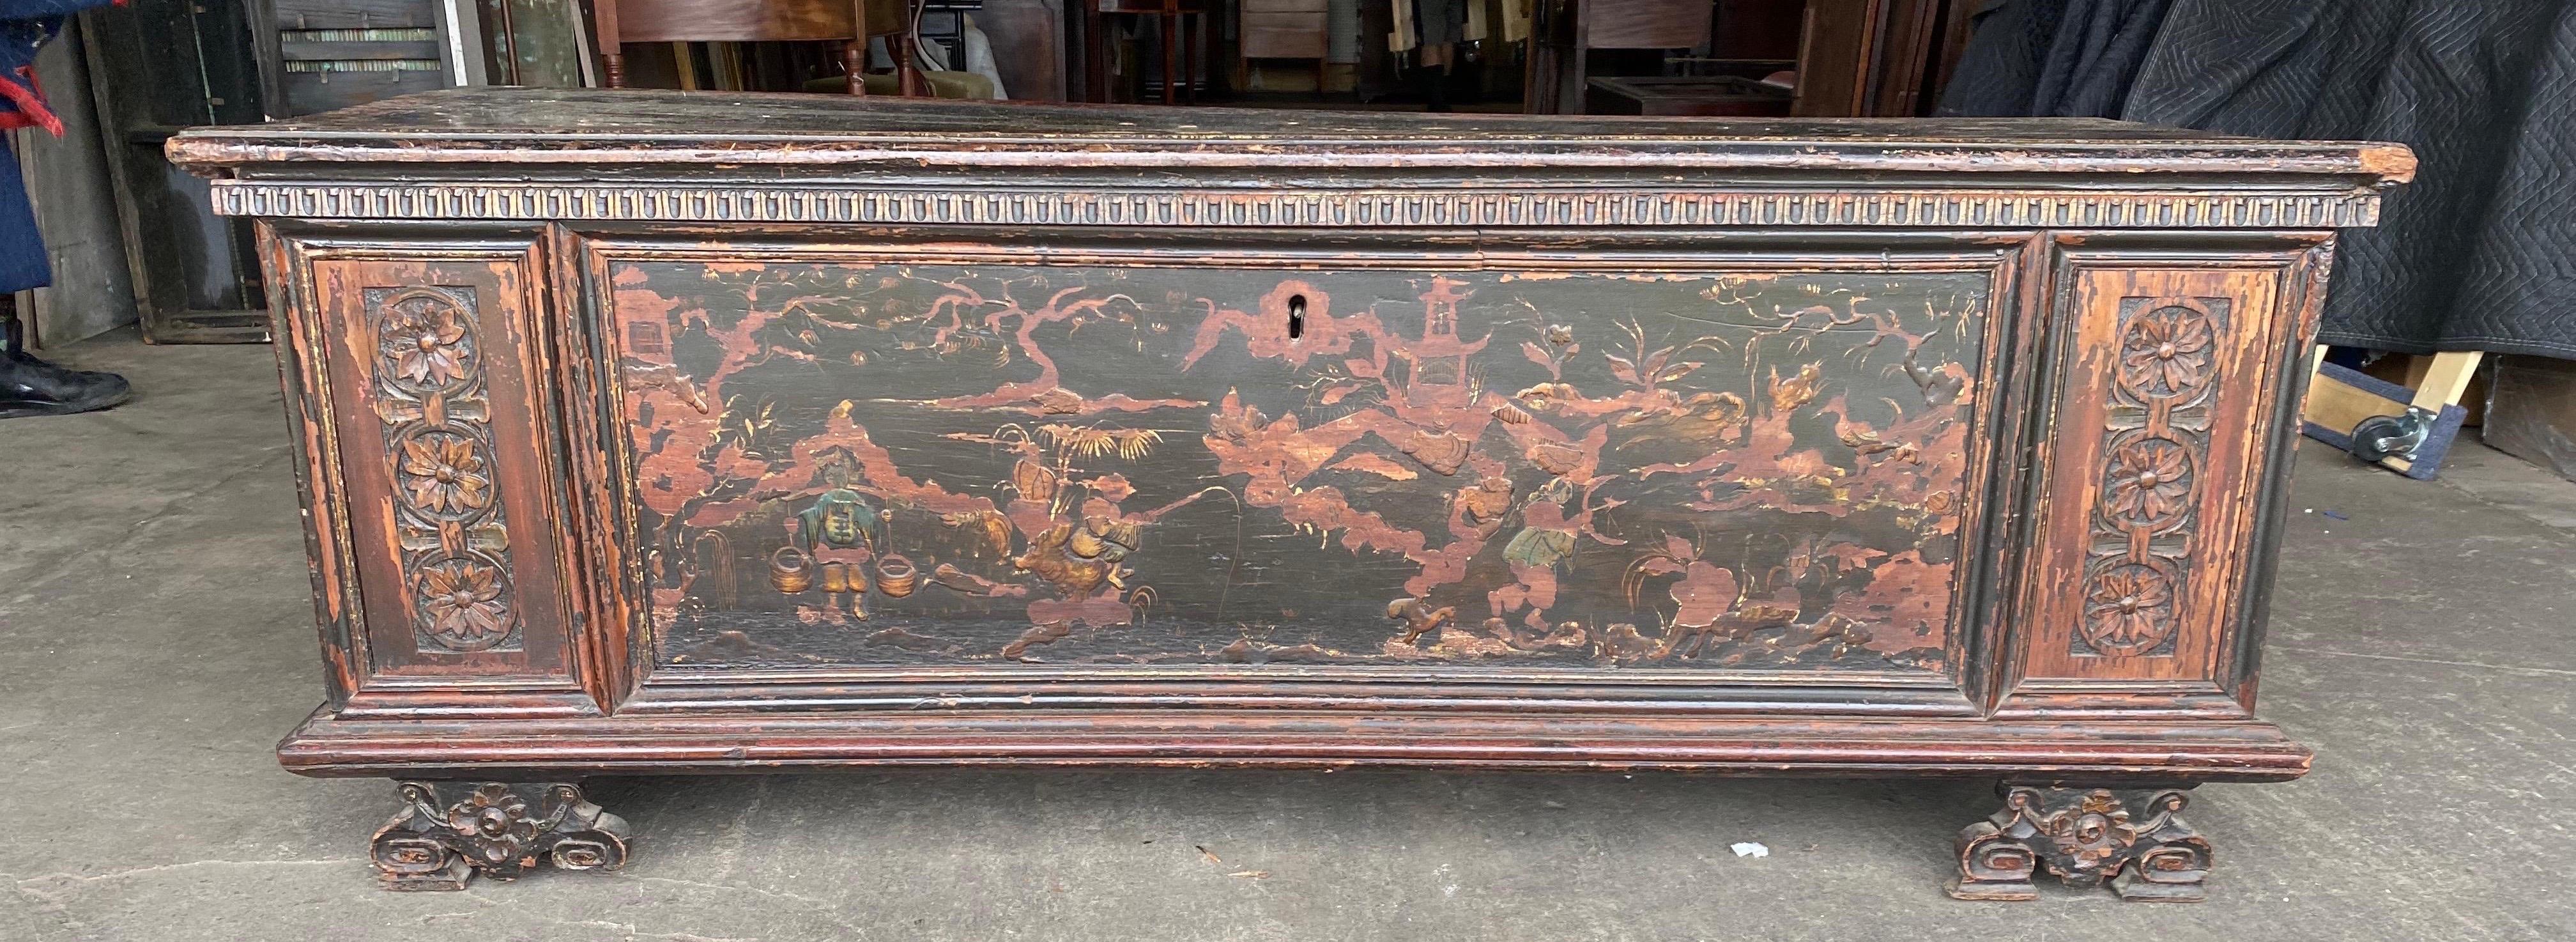 Late 17th- Early 18th Century Italian Cassone with Chinoiserie Decoration For Sale 3